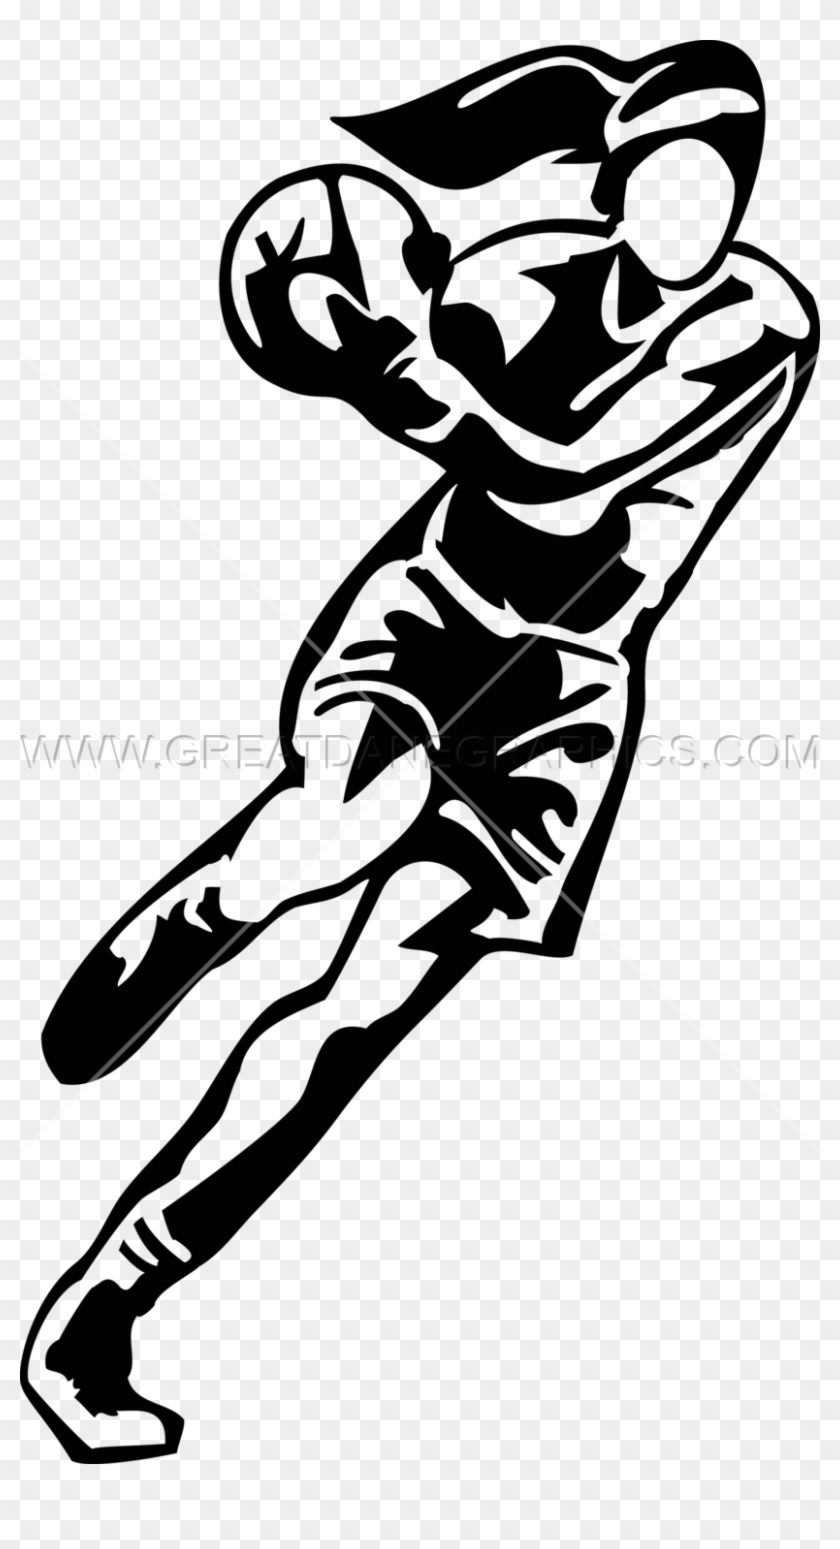 girls basketball player clipart black and white